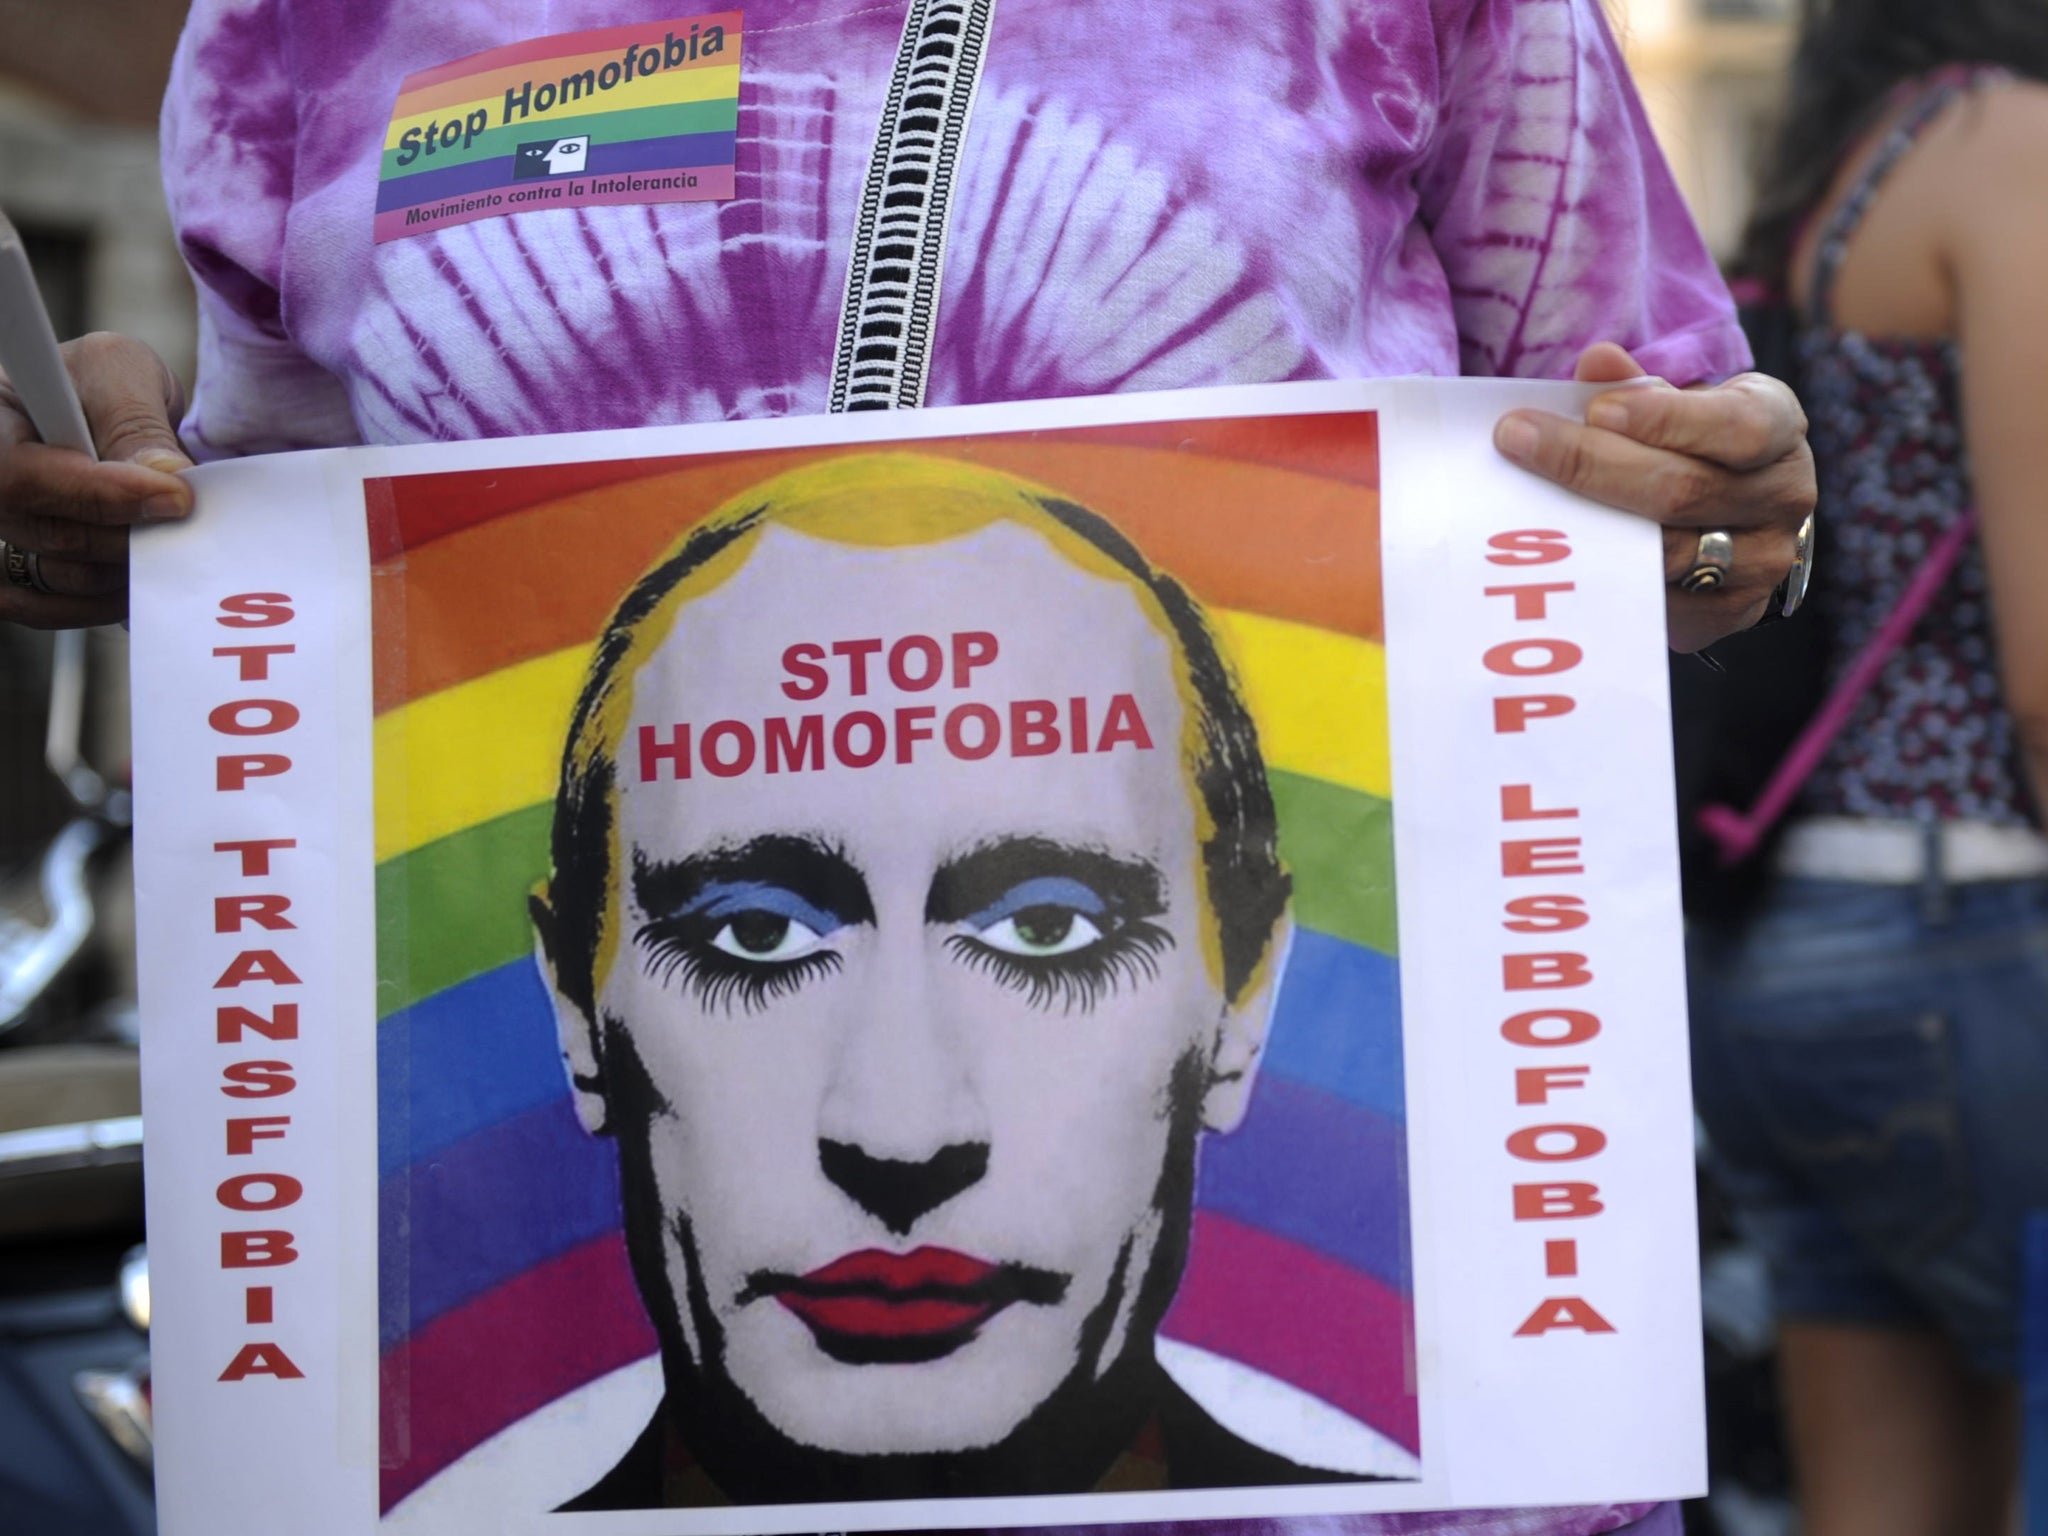 A demonstrator holds a poster depicting Russian President Vladimir Putin with make-up as he protests against homophobia and repression against gays in Russia, in Madrid